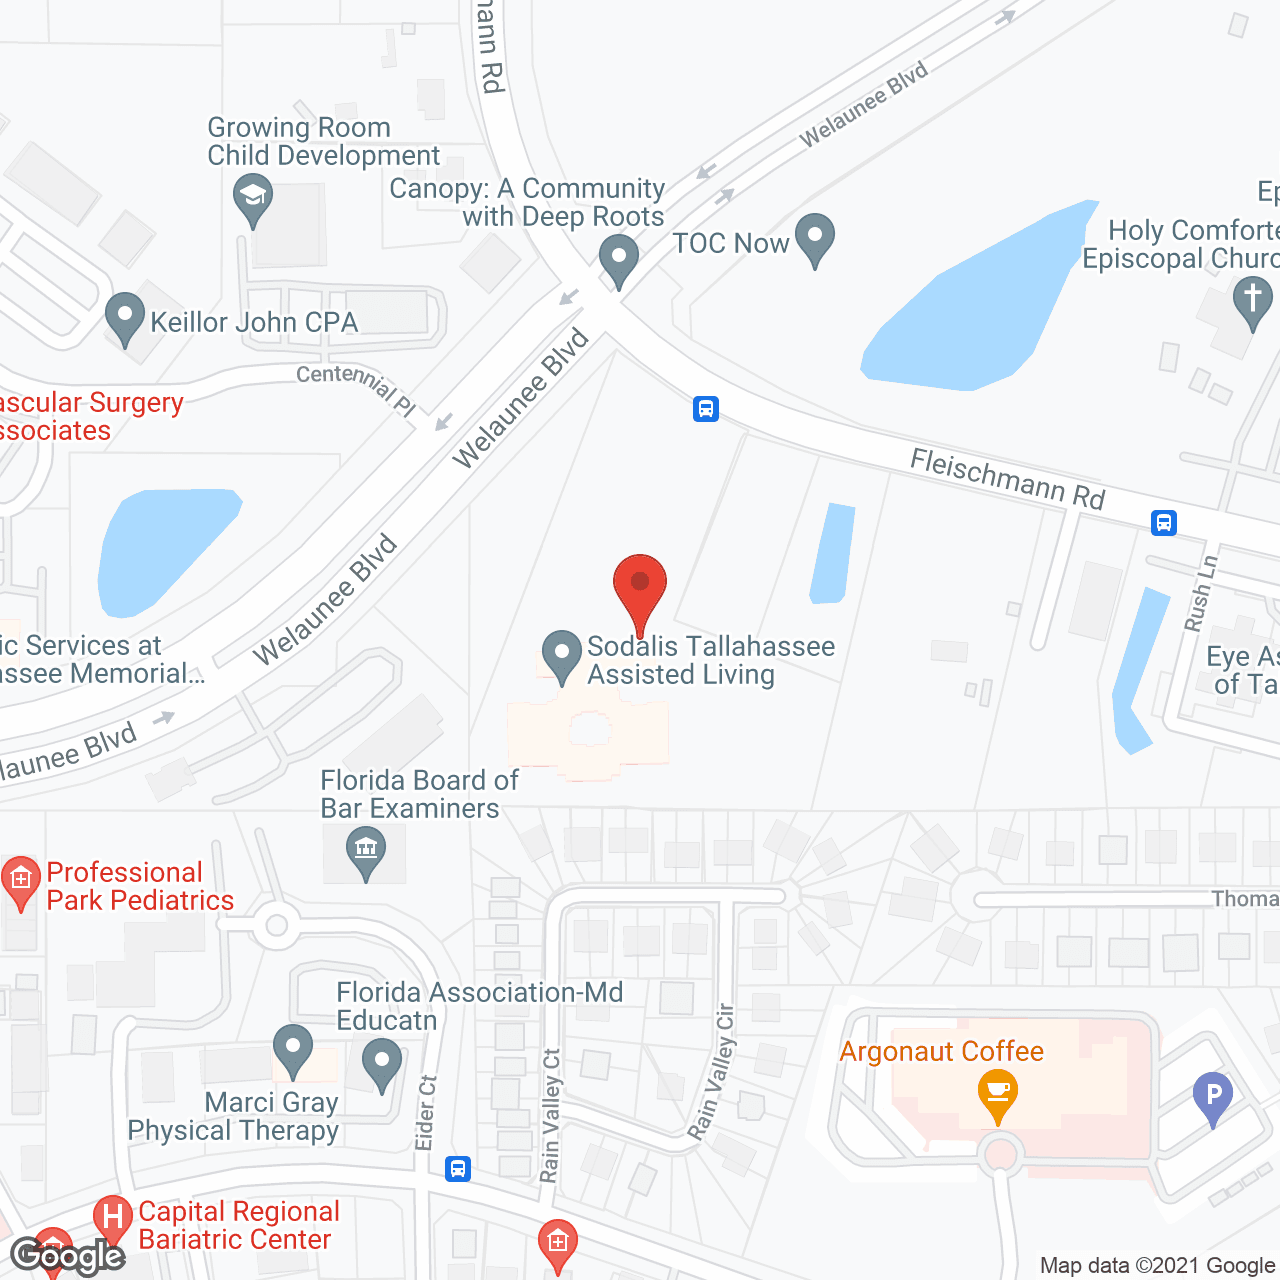 Sodalis Tallahassee Assisted Living in google map